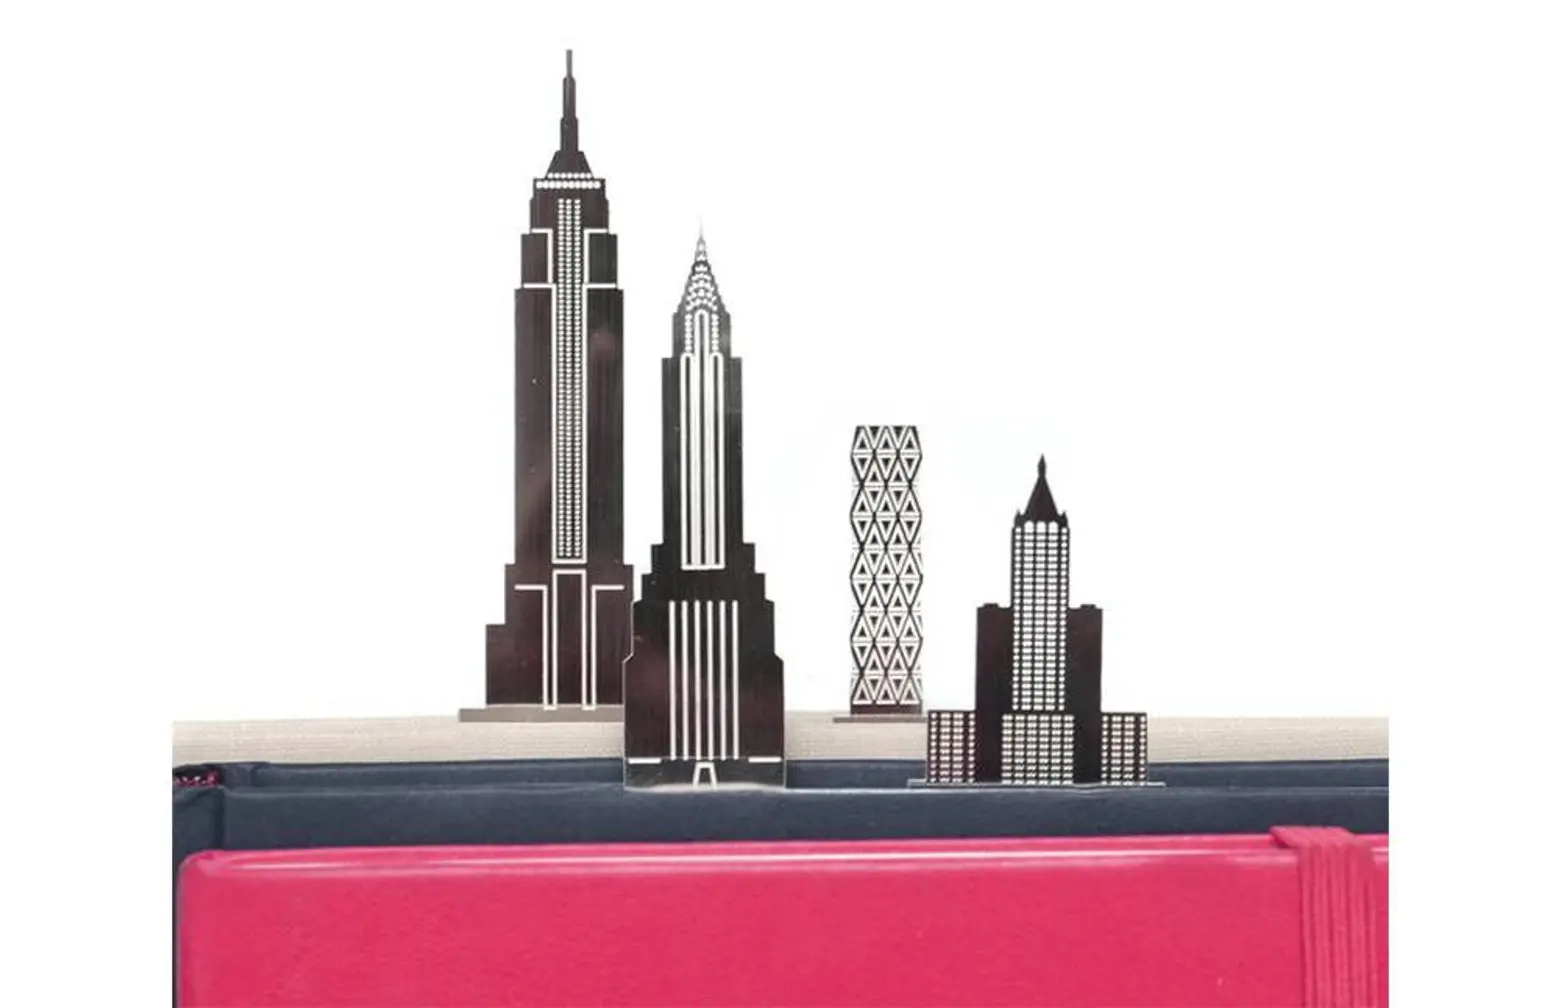 Awesome bookmarks shrink four famous NYC buildings to 1:5000 in scale